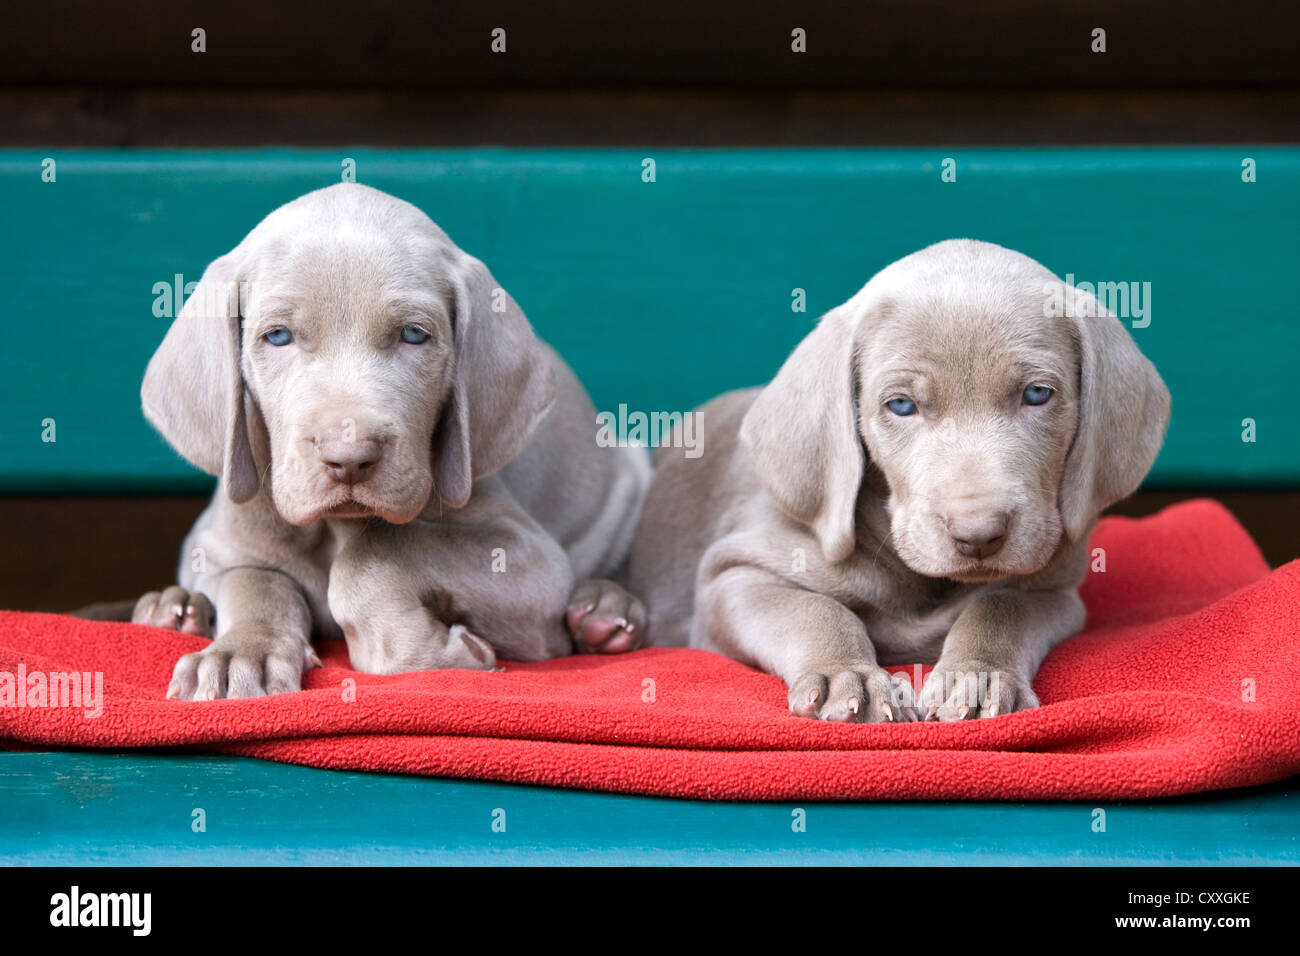 Weimaraner dogs, puppies, lying on a bench, North Tyrol, Austria, Europe Stock Photo